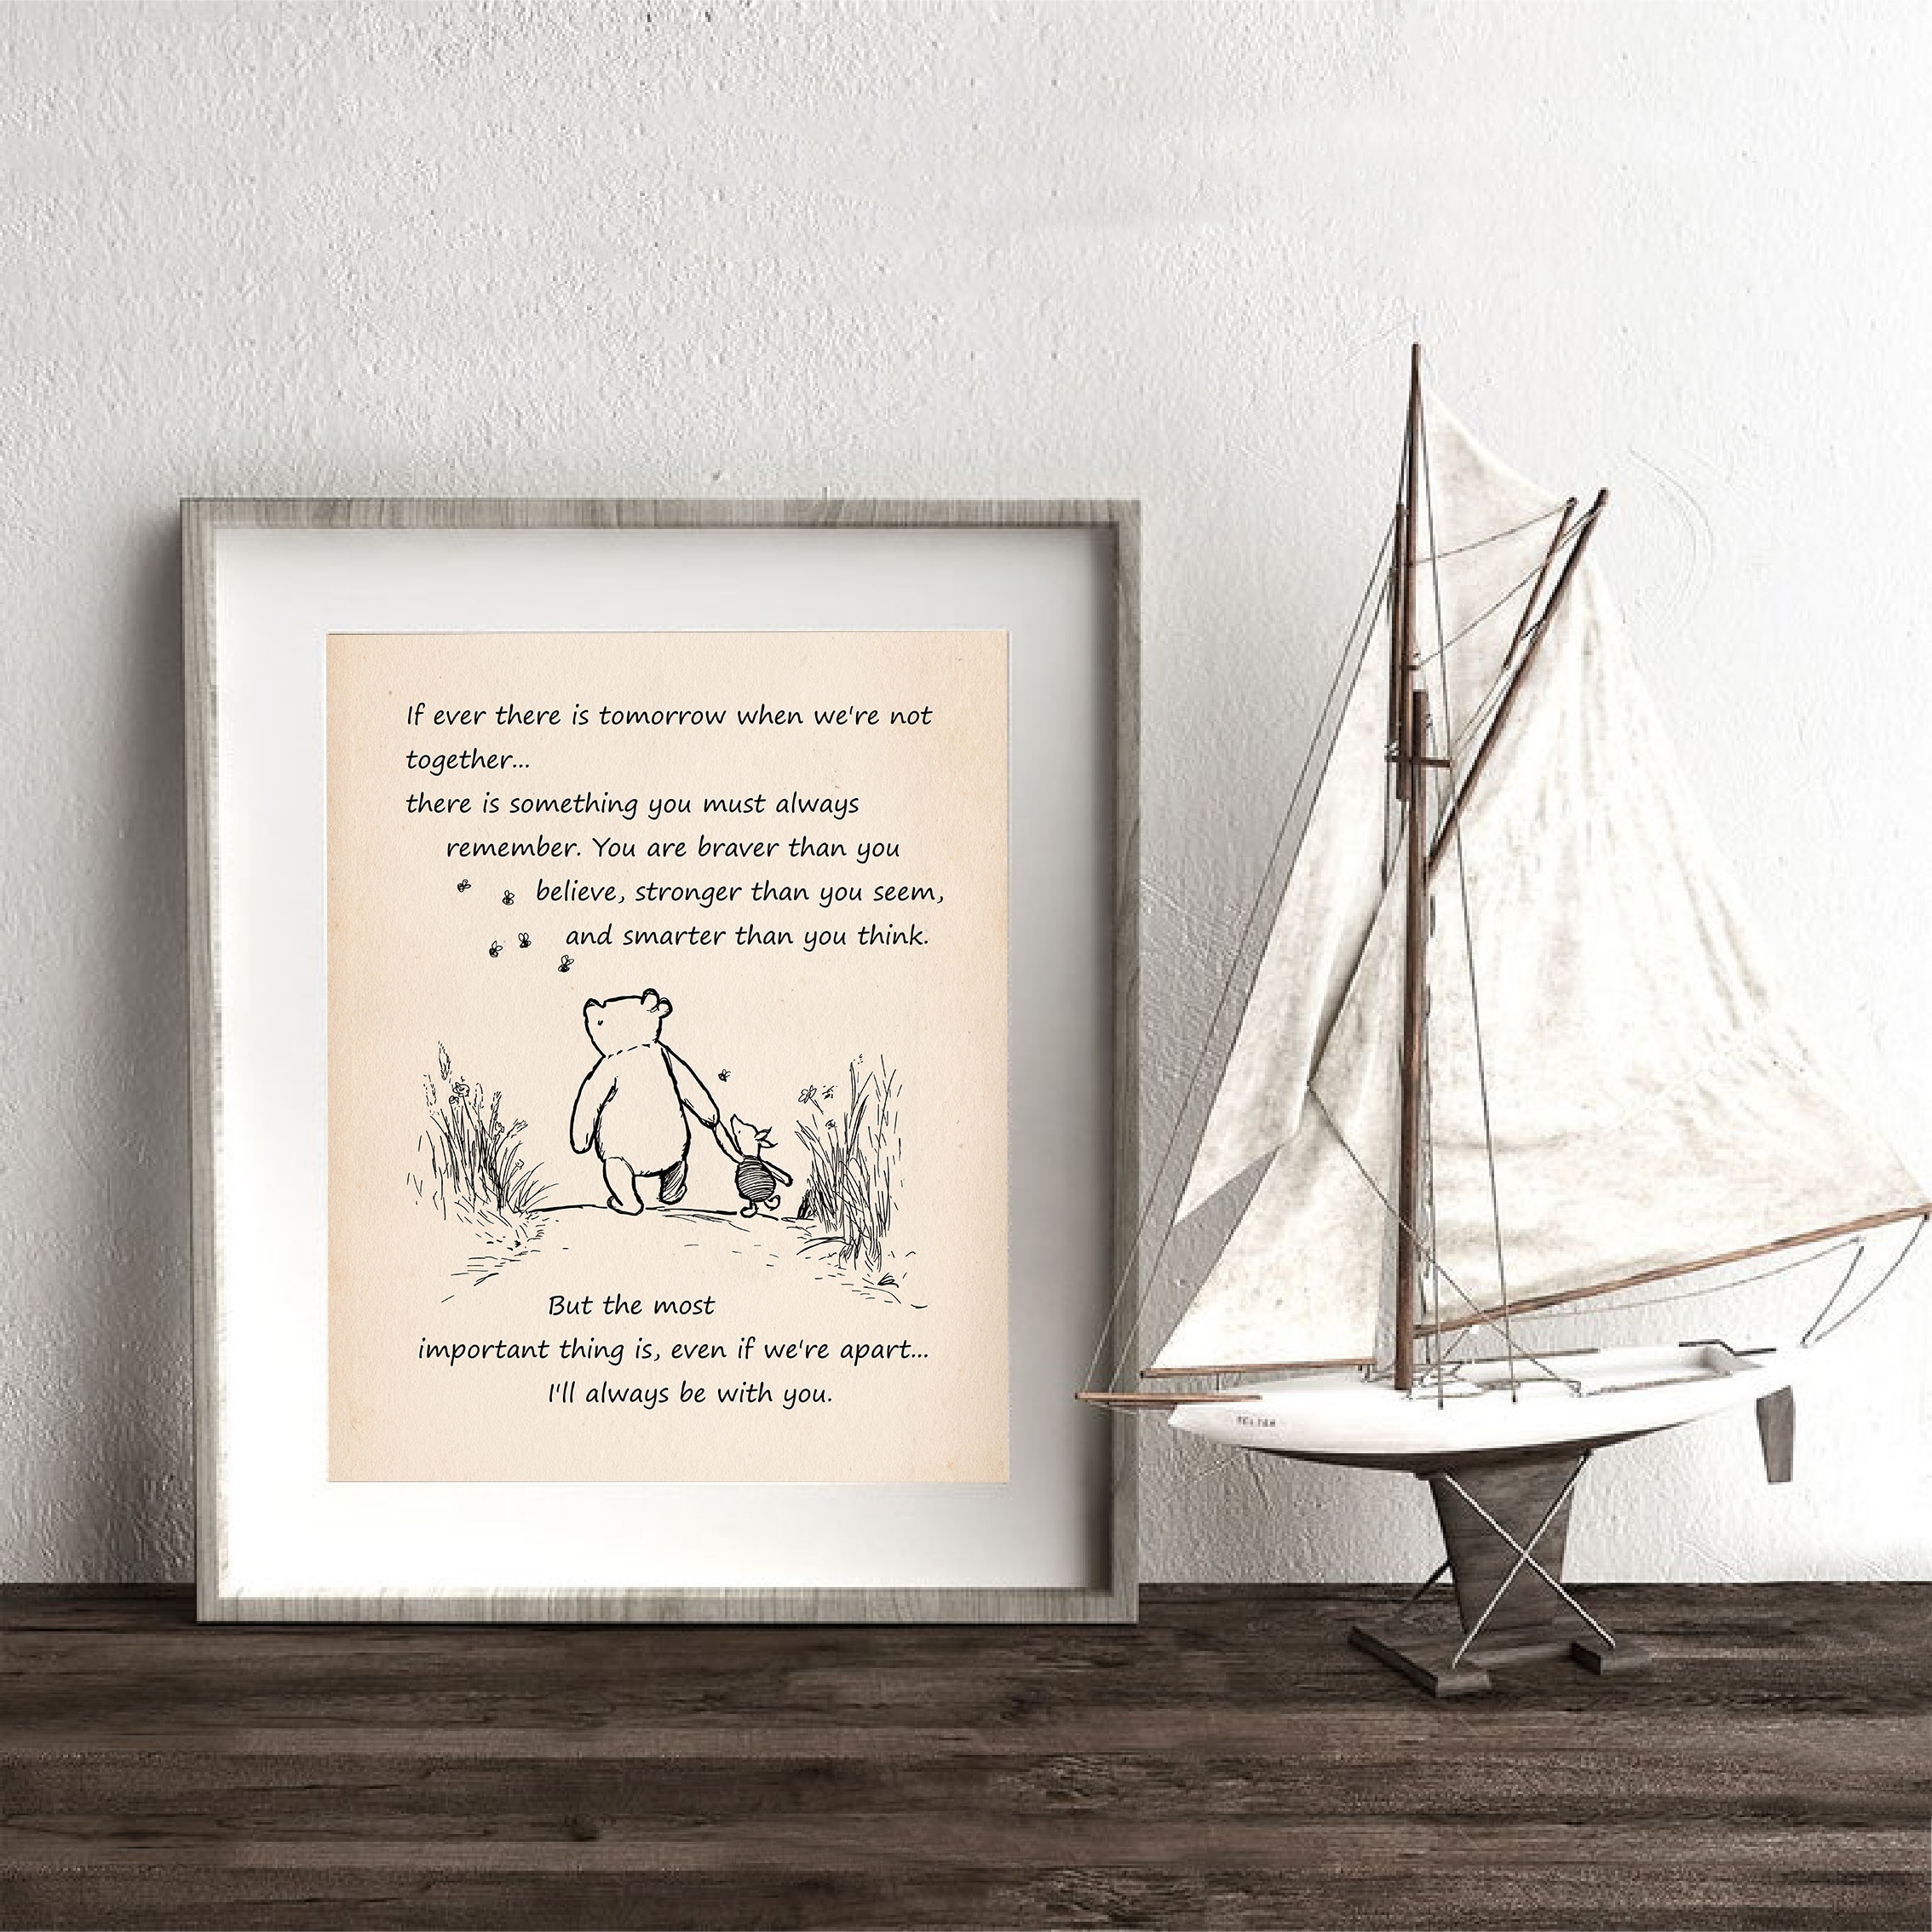 Winnie the Pooh Quote Vintage Poster Prints Nursery Decor If Ever There is Tomorrow Cartoon Art 3 - Winnie The Pooh Plush